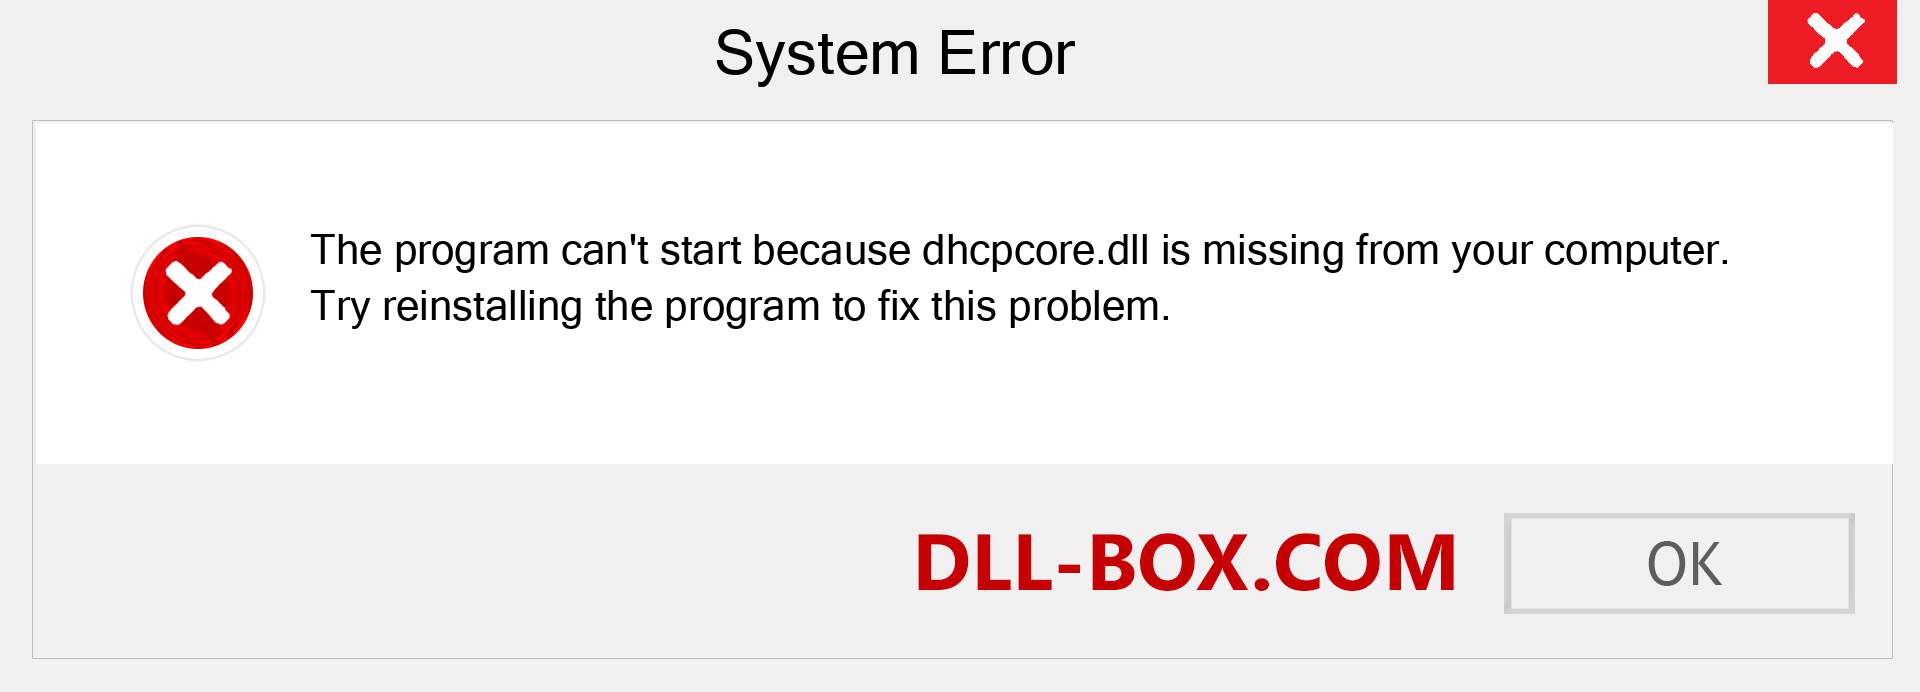  dhcpcore.dll file is missing?. Download for Windows 7, 8, 10 - Fix  dhcpcore dll Missing Error on Windows, photos, images